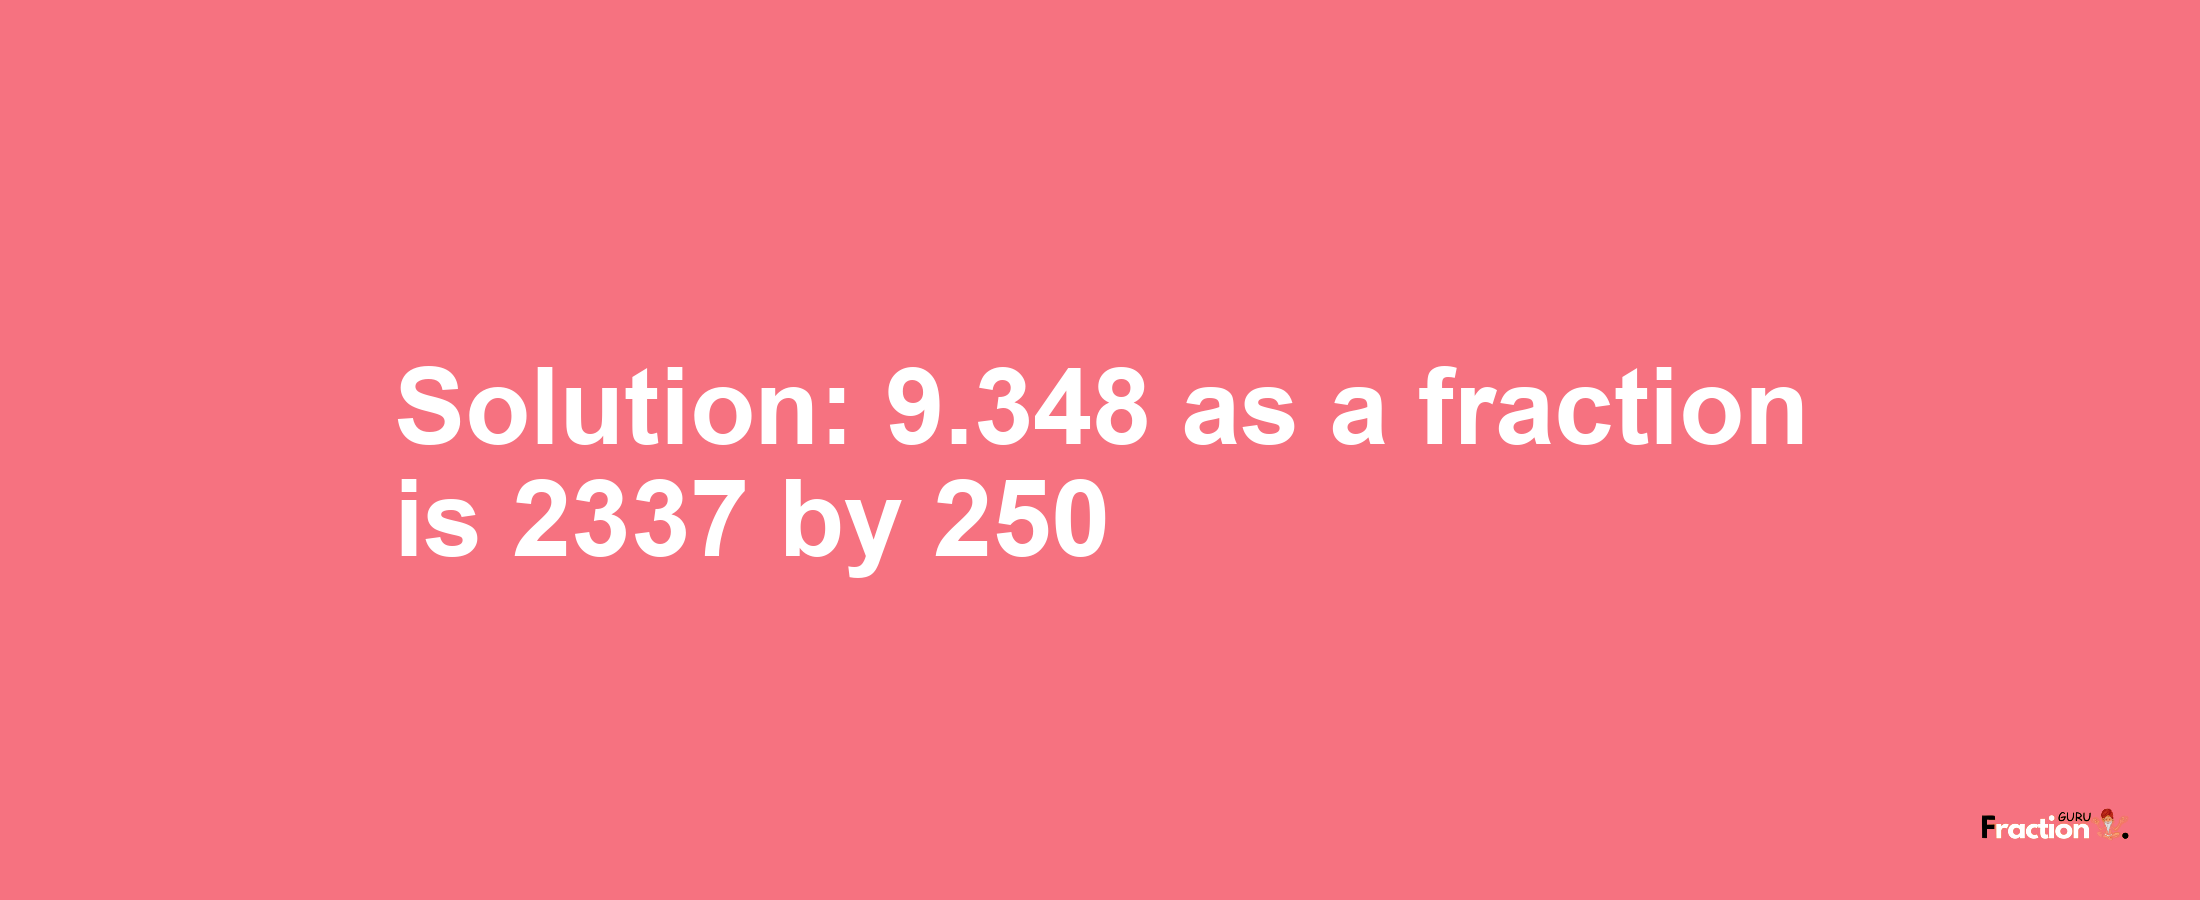 Solution:9.348 as a fraction is 2337/250